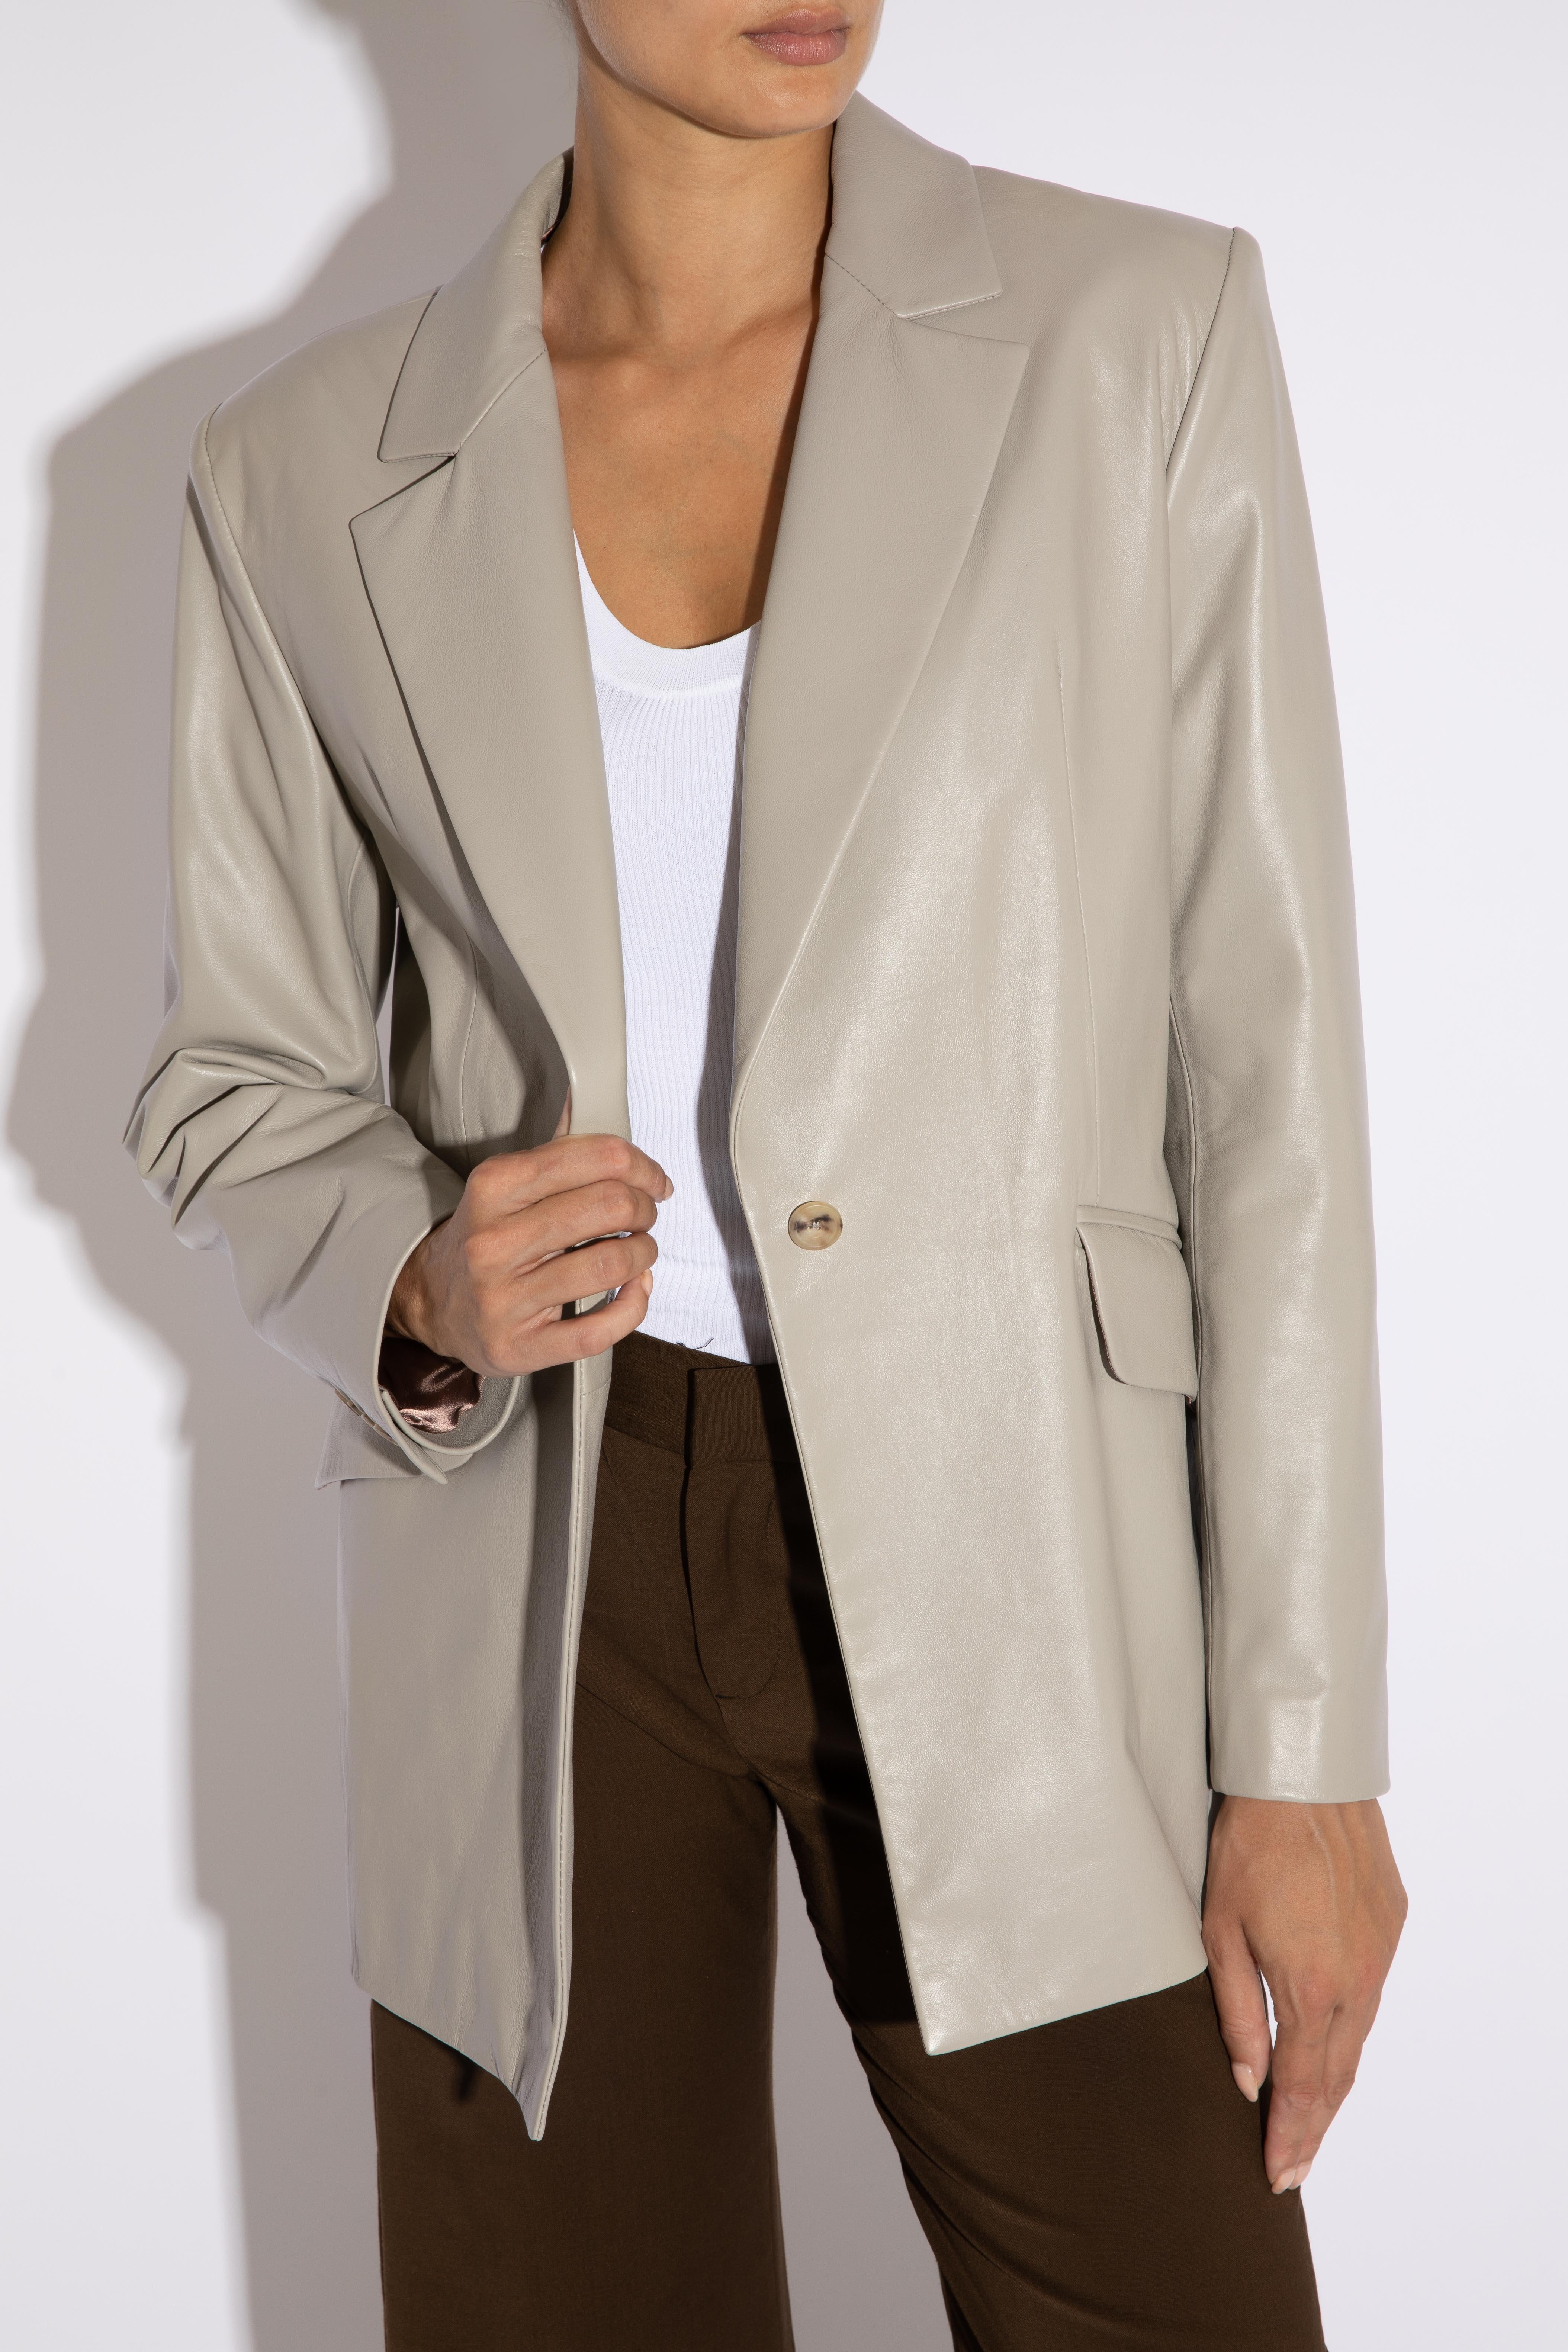 Verheyen London Chesca Oversize Blazer in Stone Grey Leather, Size 6

Handmade in London, made with lamb leather this luxury item is an investment piece to wear for a lifetime.  Made with an oversize fit, its ideal for wearing with a jumper for